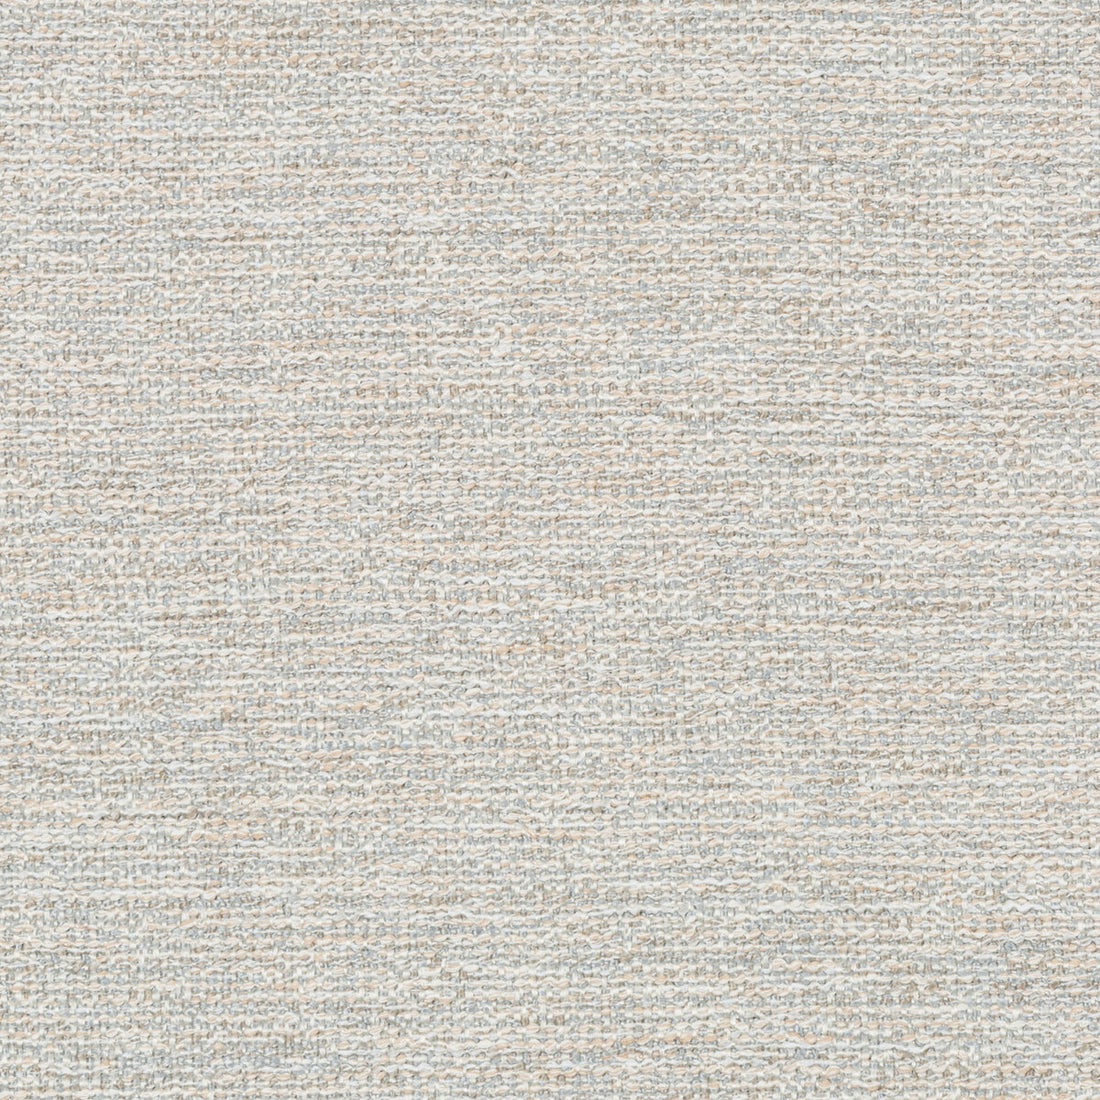 Tide Over fabric in platinum color - pattern 35922.11.0 - by Kravet Couture in the Vista collection